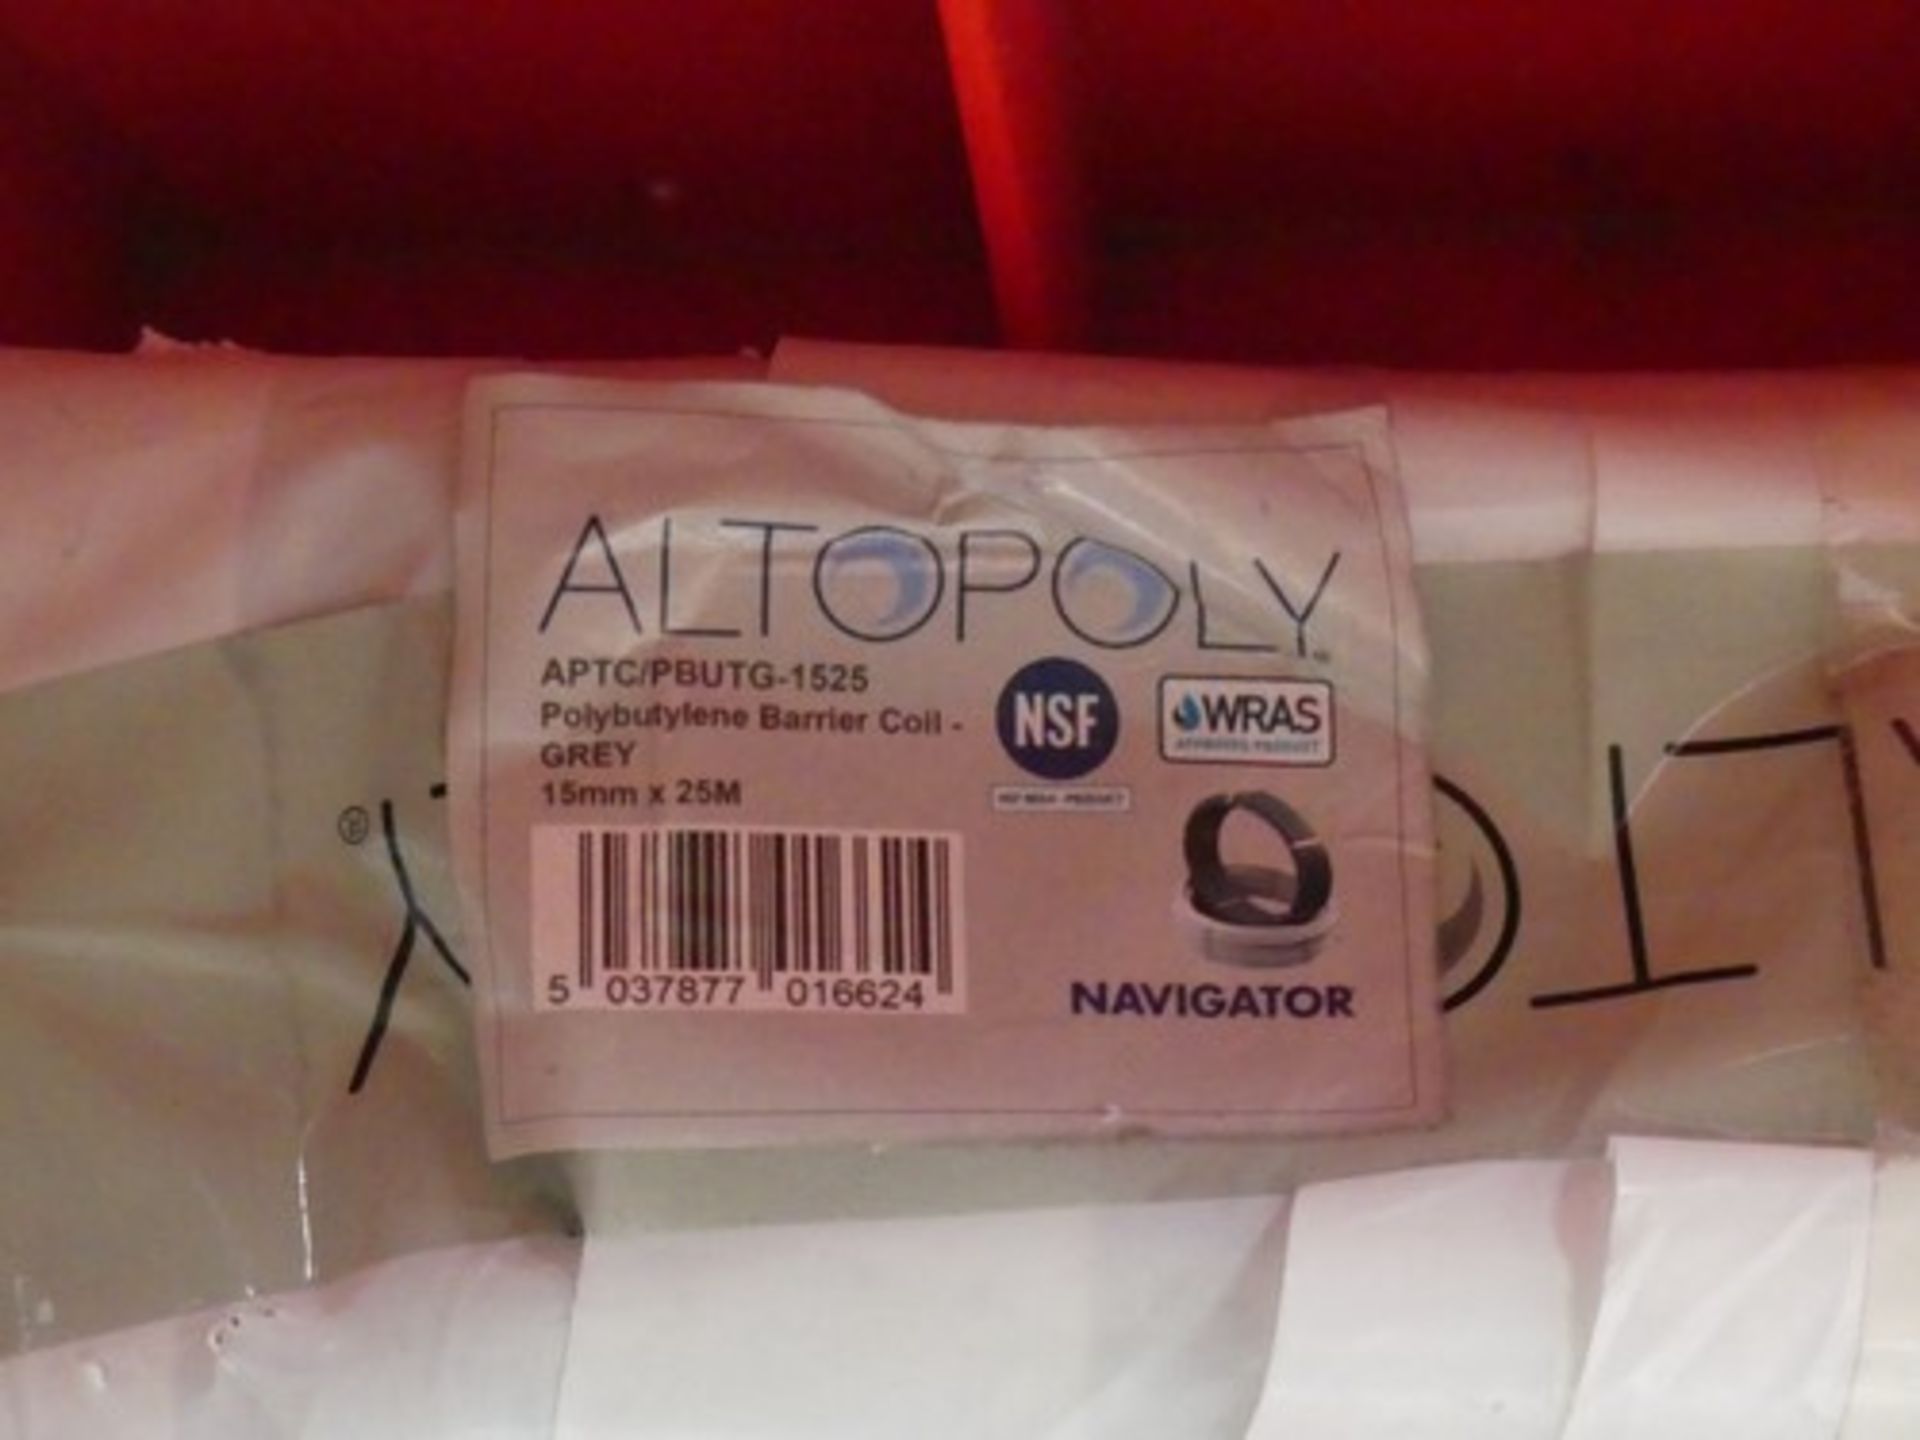 6 x rolls of Altopoly polybutylene barrier coil, comprising 3 x rolls of 15mm x 25m - white, 1 x - Image 3 of 5